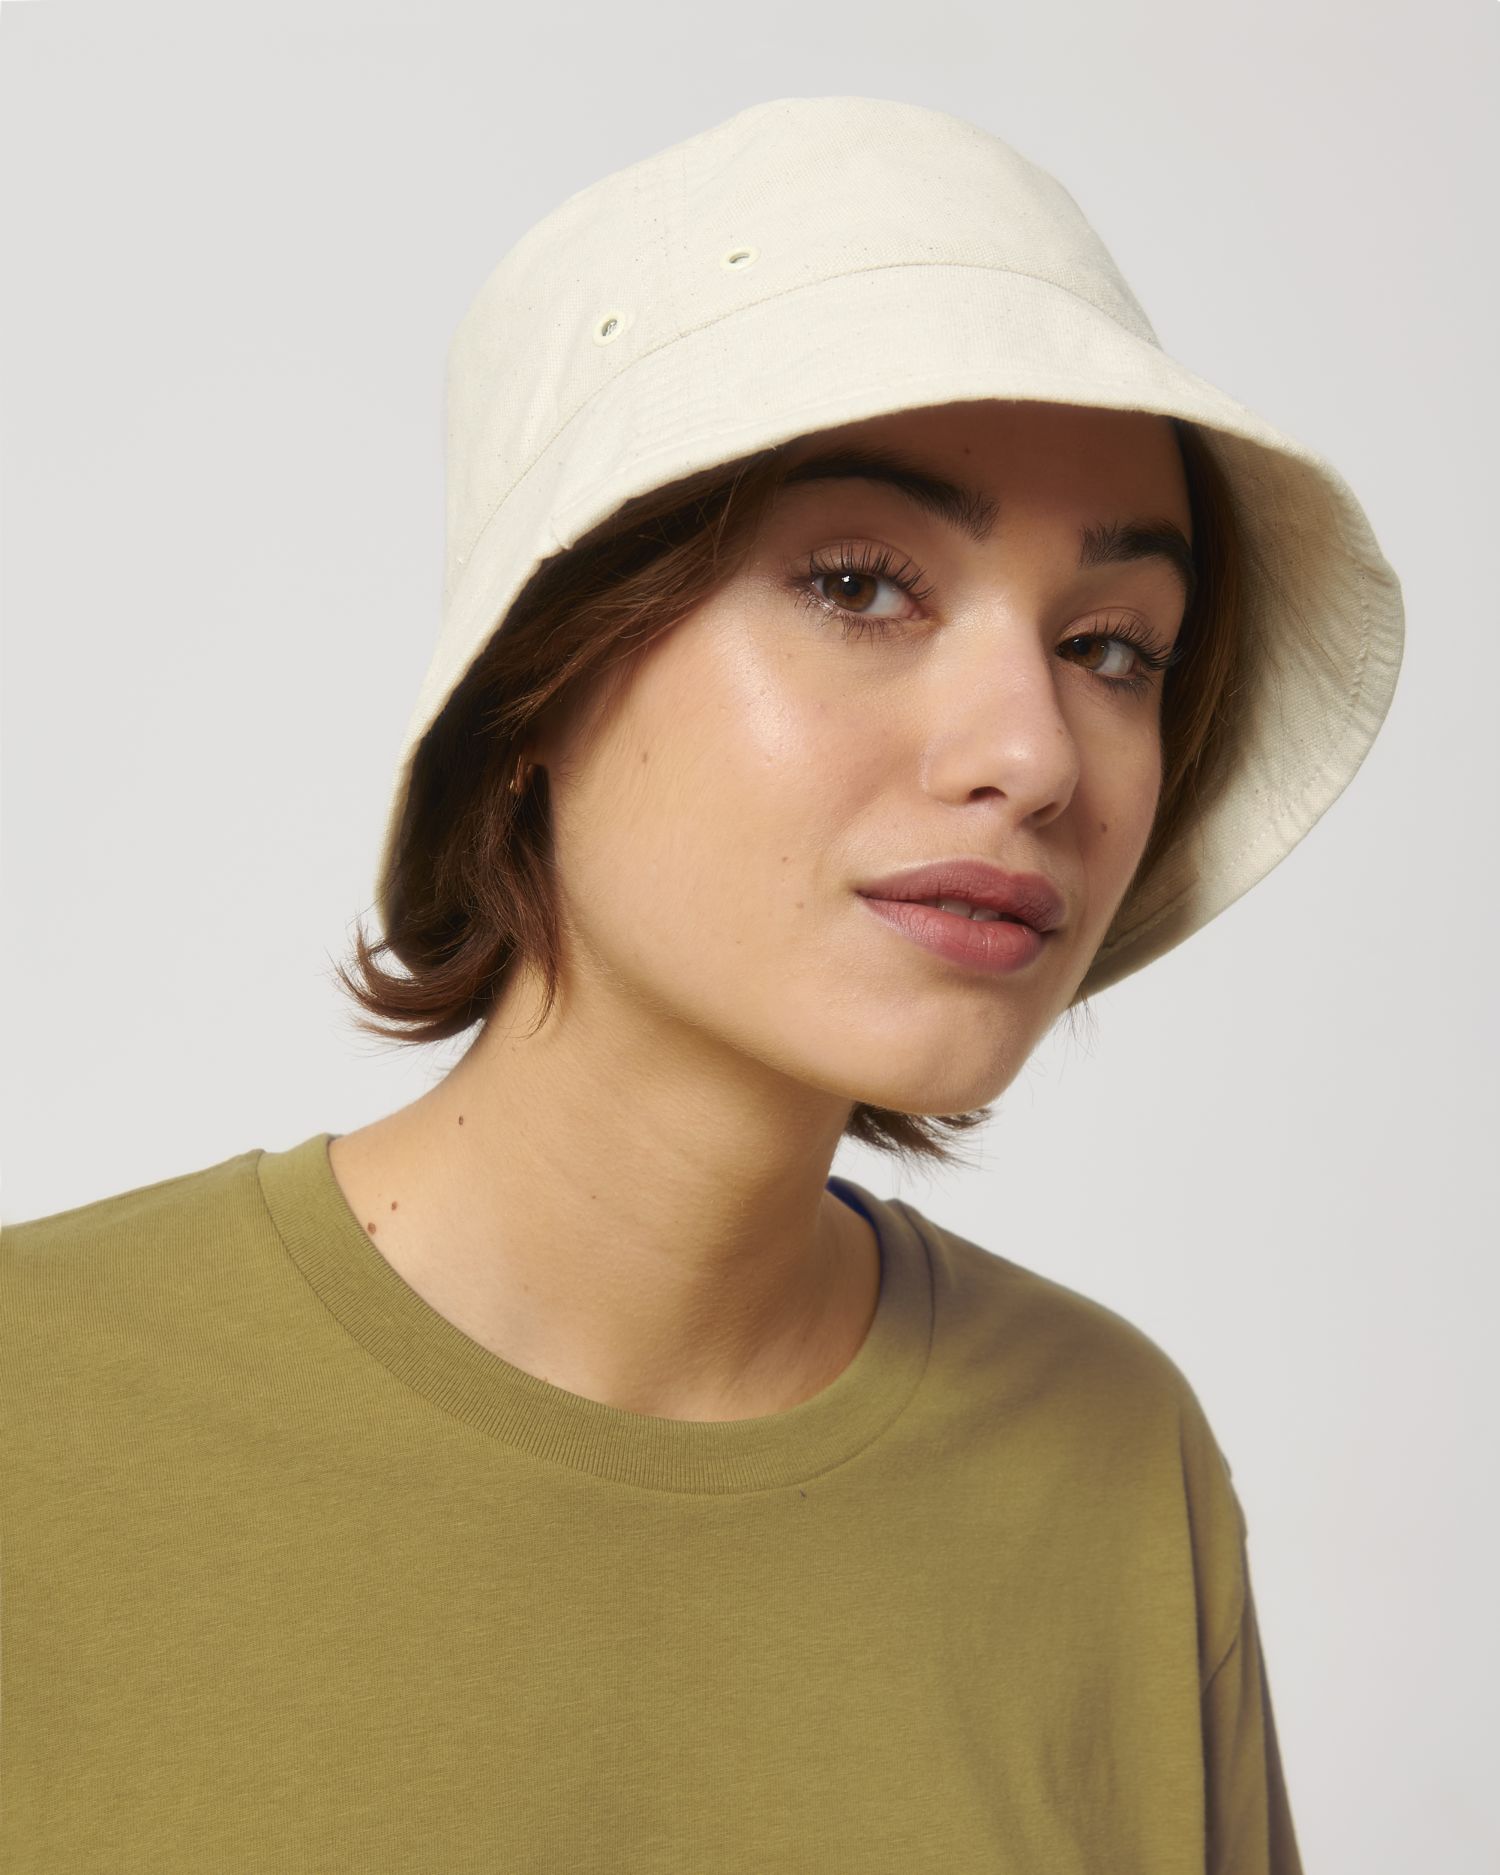 Hat Bucket Hat in Farbe Natural